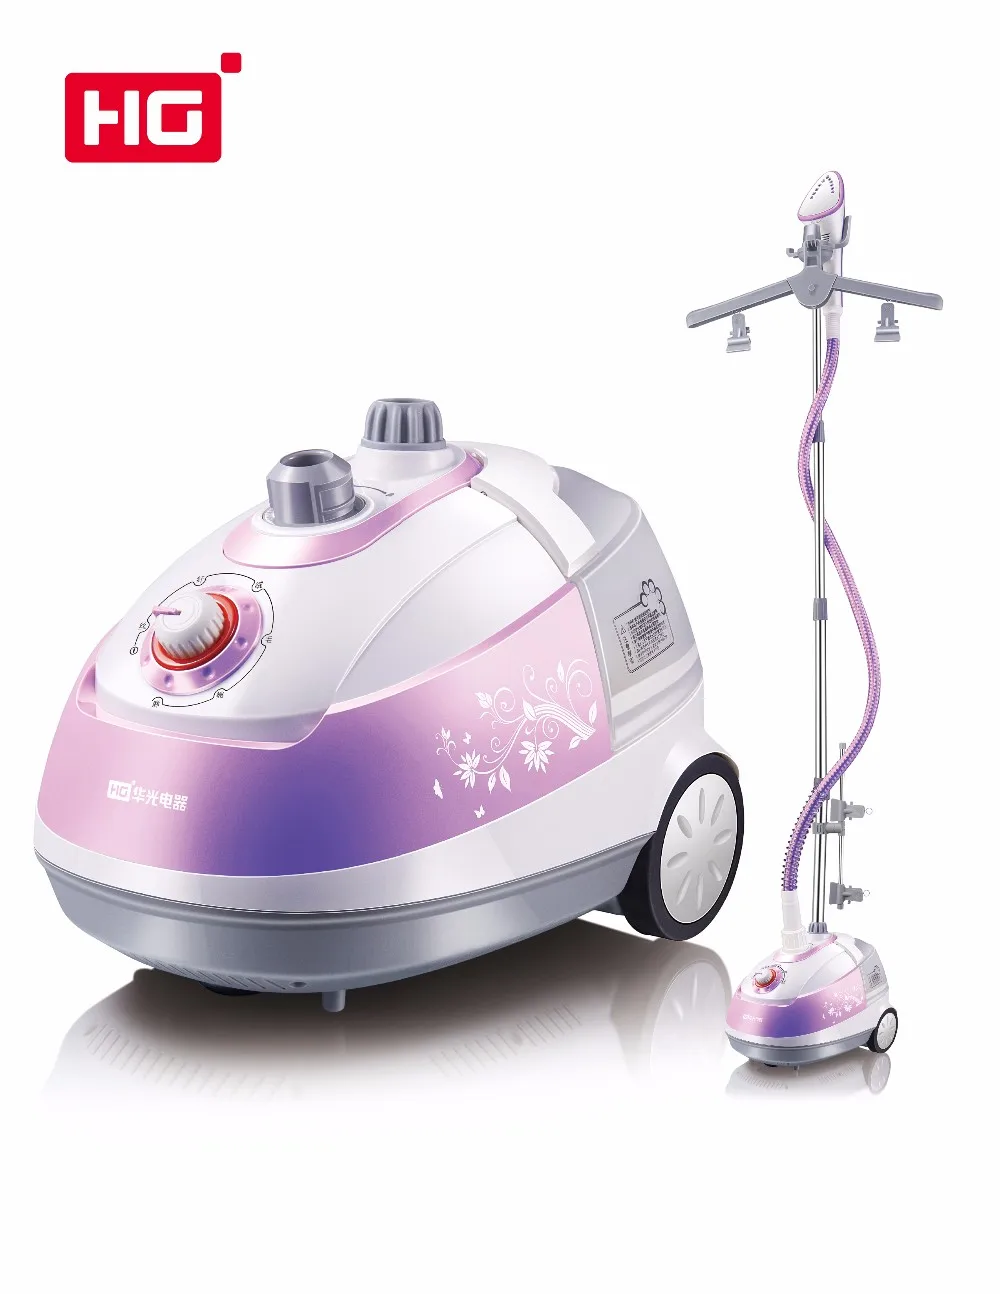 HG 1580w Professional Vertical Steam Iron for Clothes Hanging Fabric Iron Upright Standing Garment Steamer